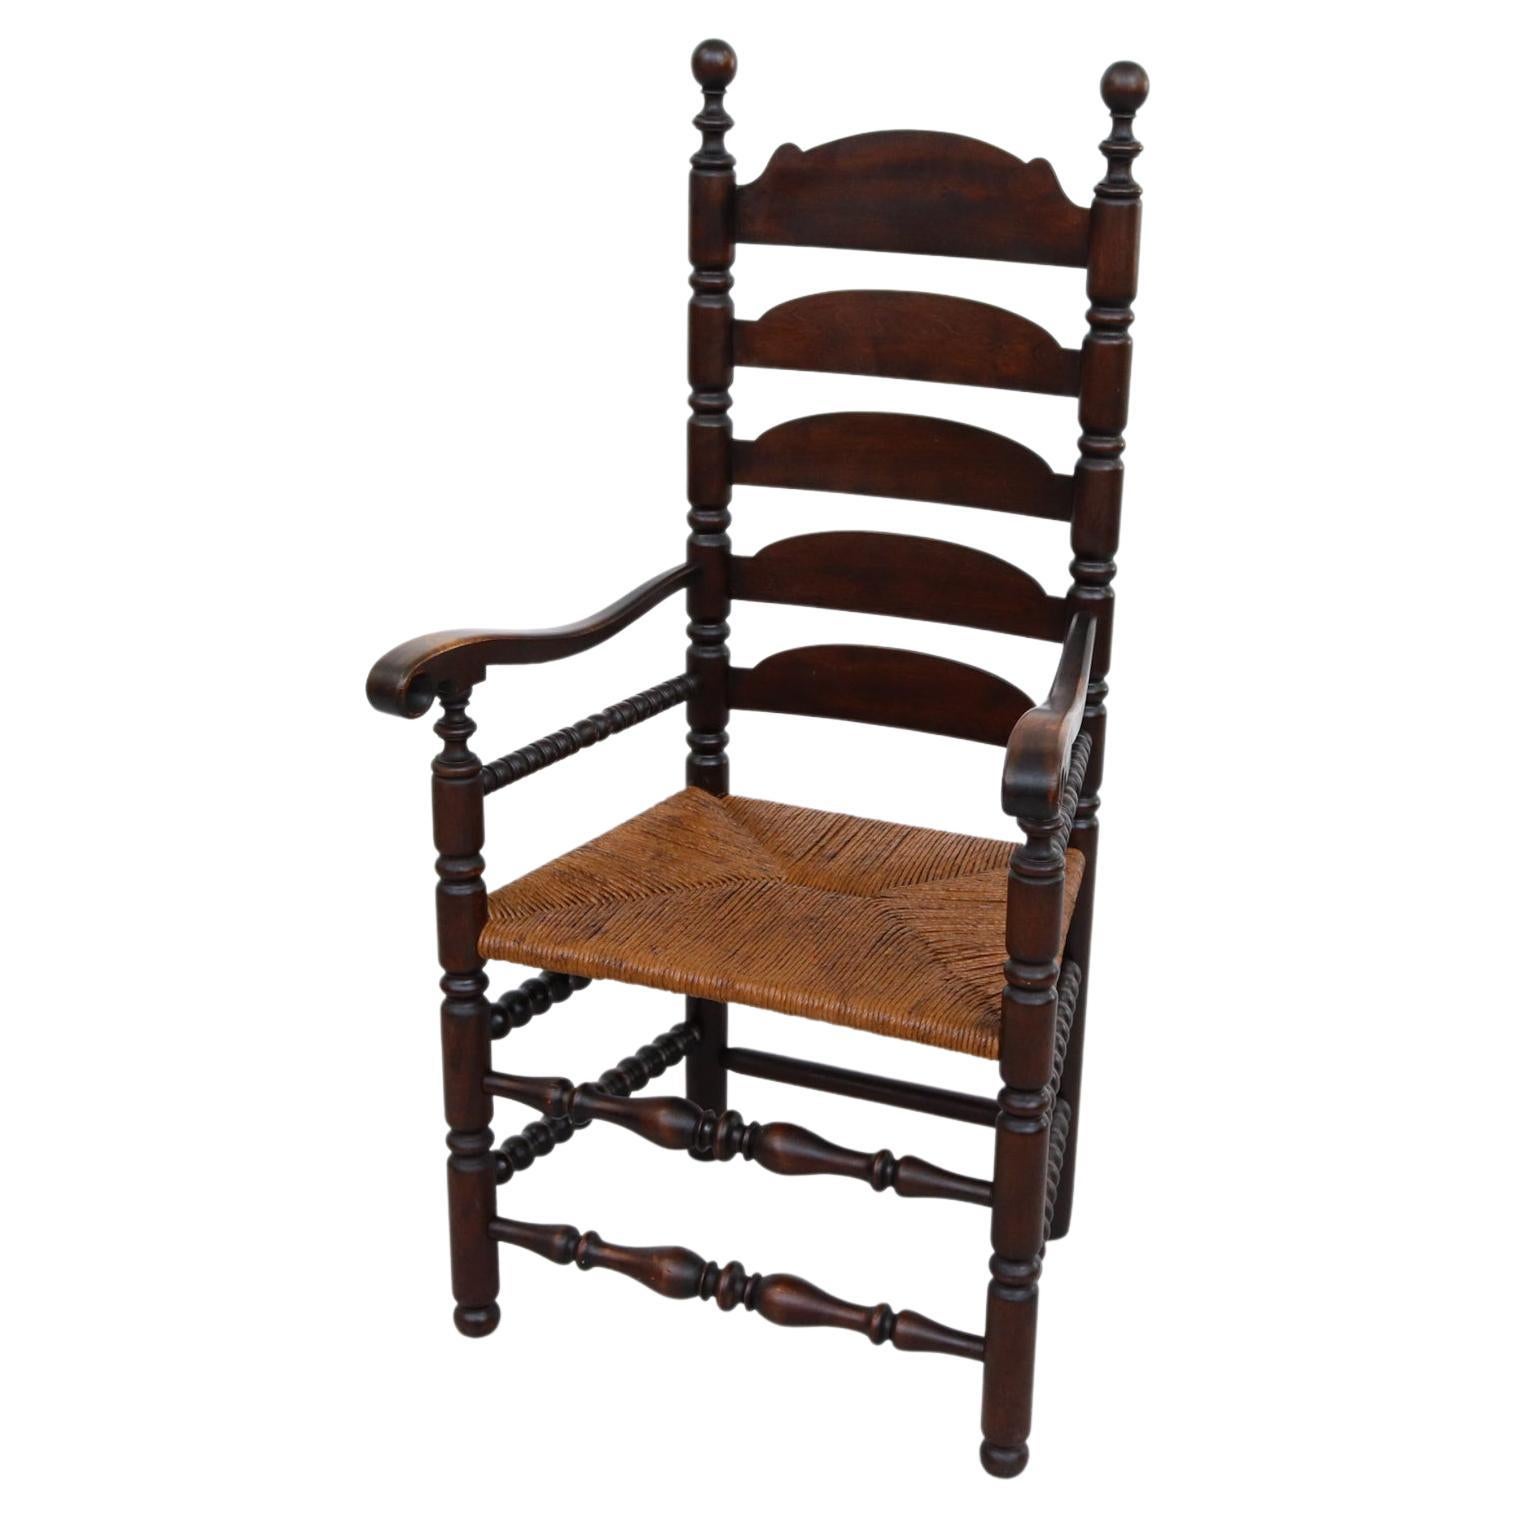 Pennsylvania Dutch Inspired Ladder Back Armchair with Rush Seat